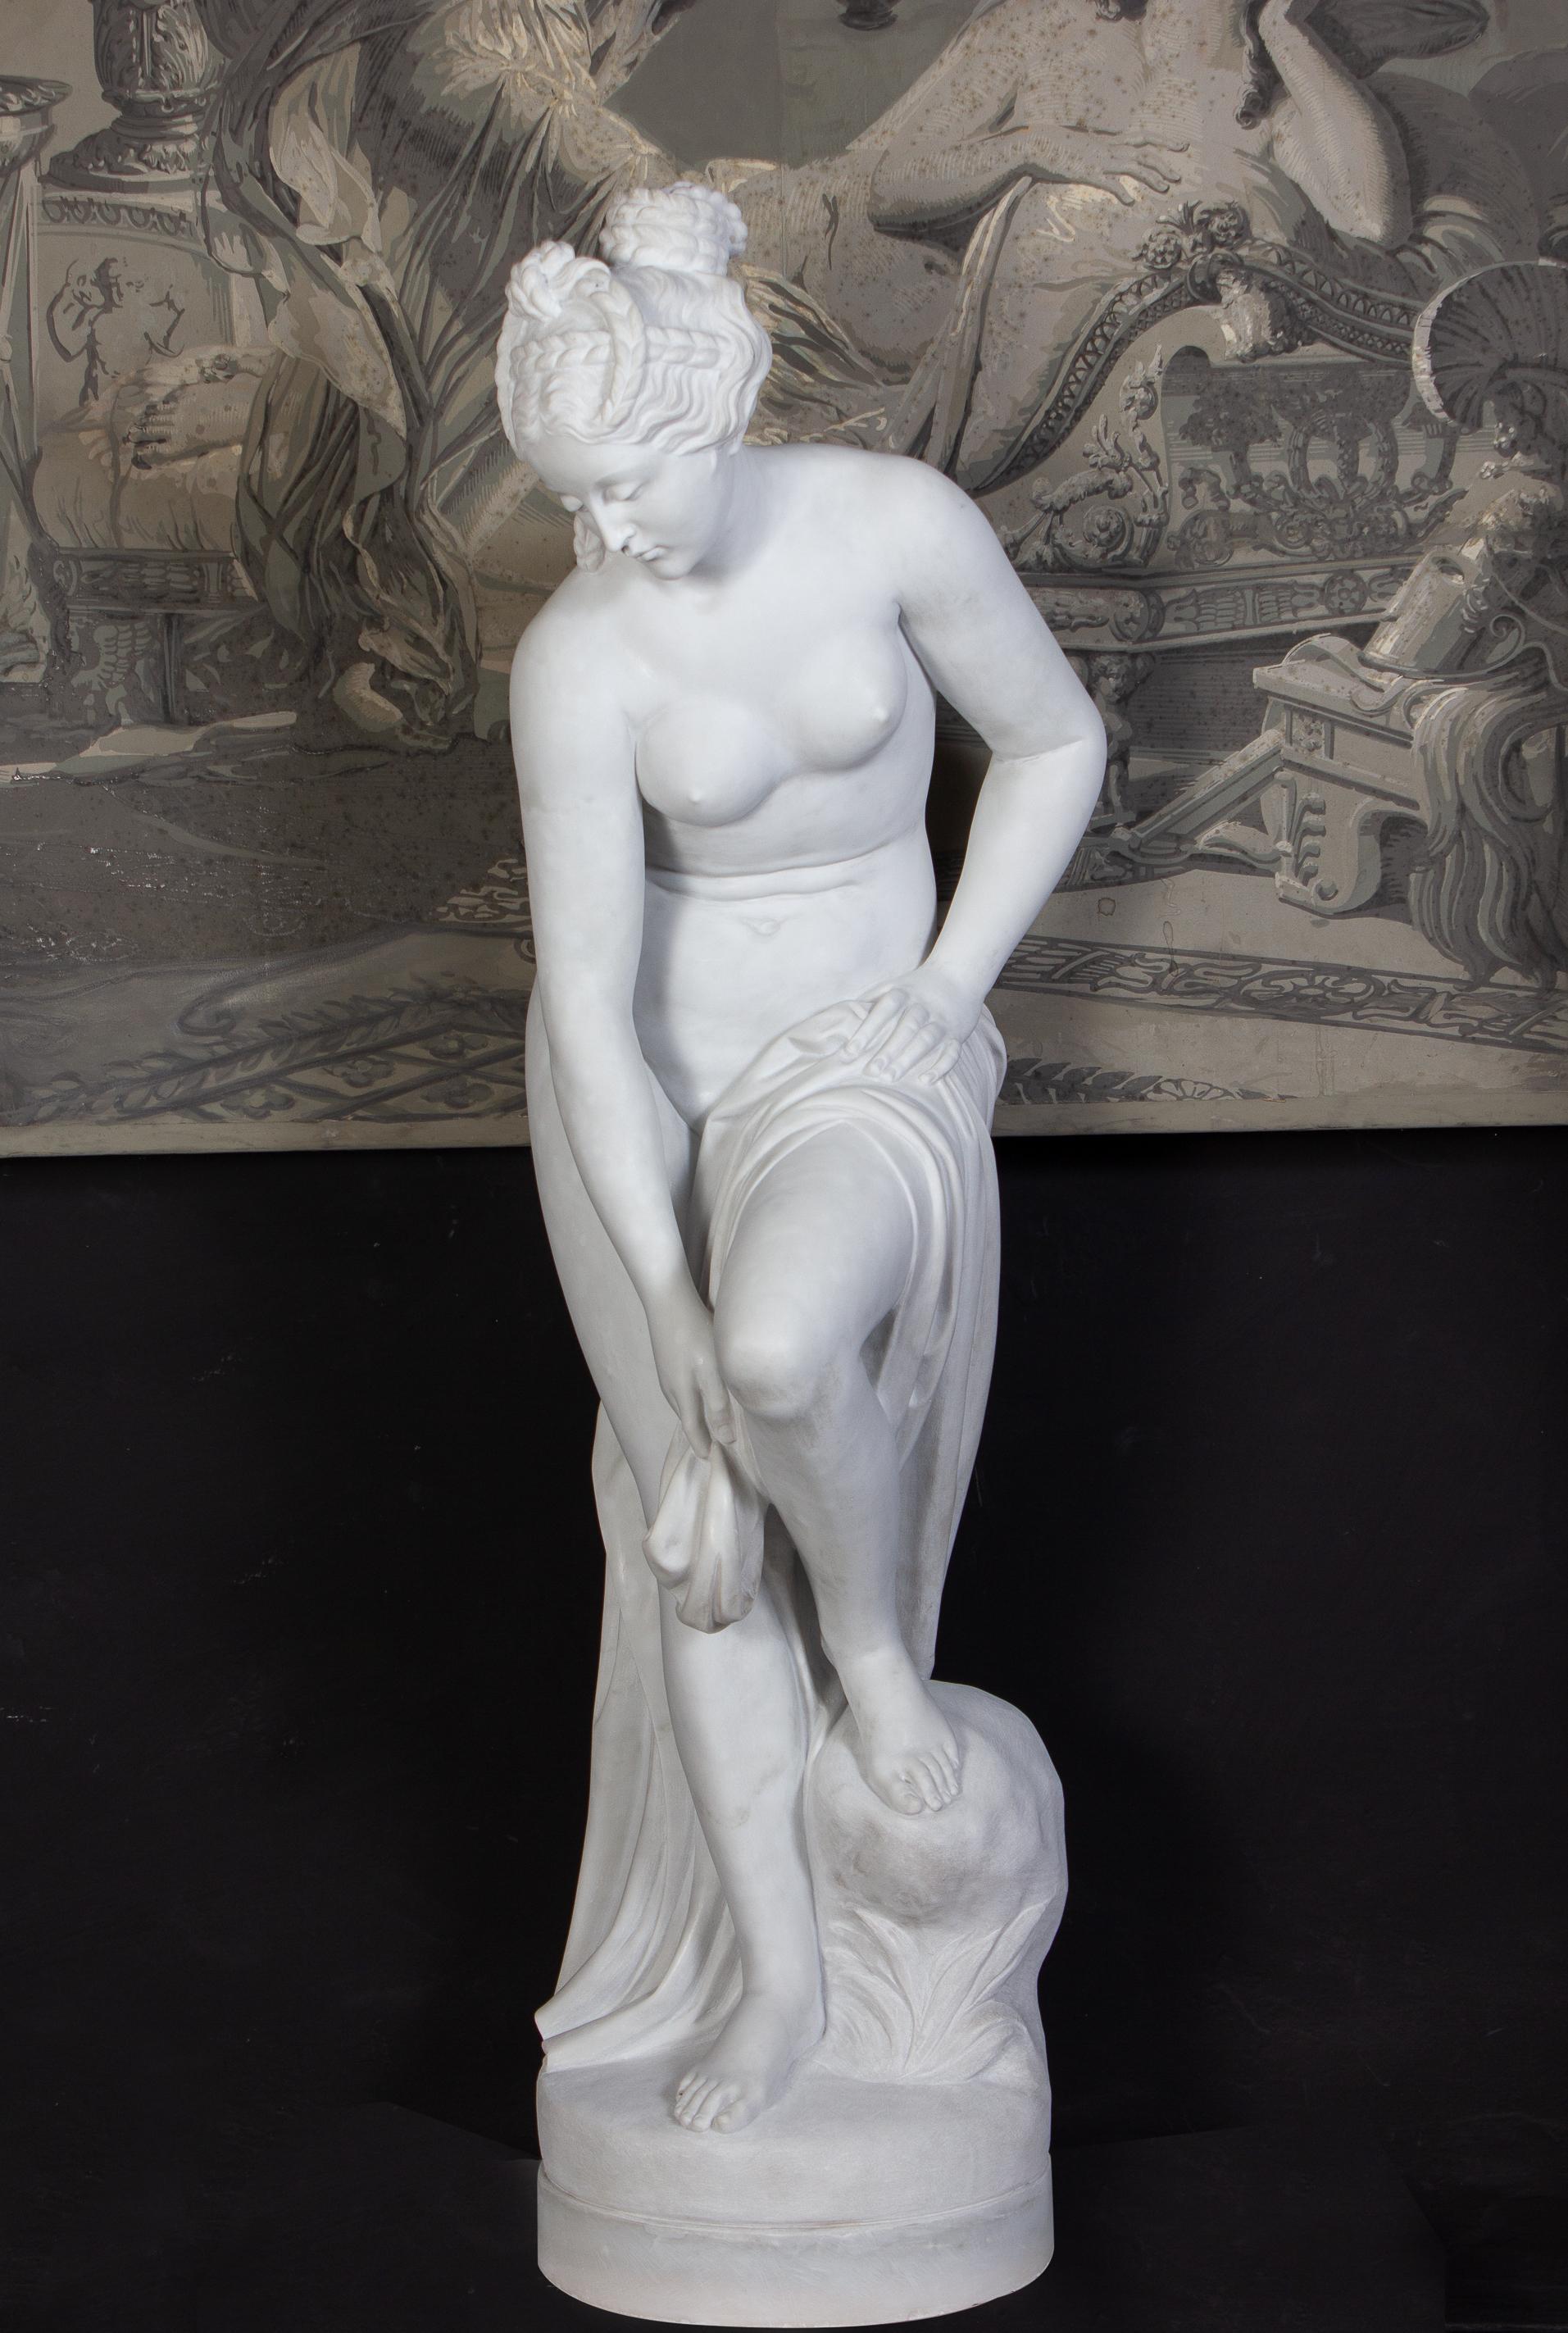 Late 19th century French finely carved white Carrara marble figure of Bathing Venus  . The marble base is not included in the price. 
AFTER CHRISTOPHE-GABRIEL ALLEGRAIN (FRENCH, 1710-1795): A 19TH CENTURY MARBLE FIGURE OF VENUS SORTANT DU BAIN the